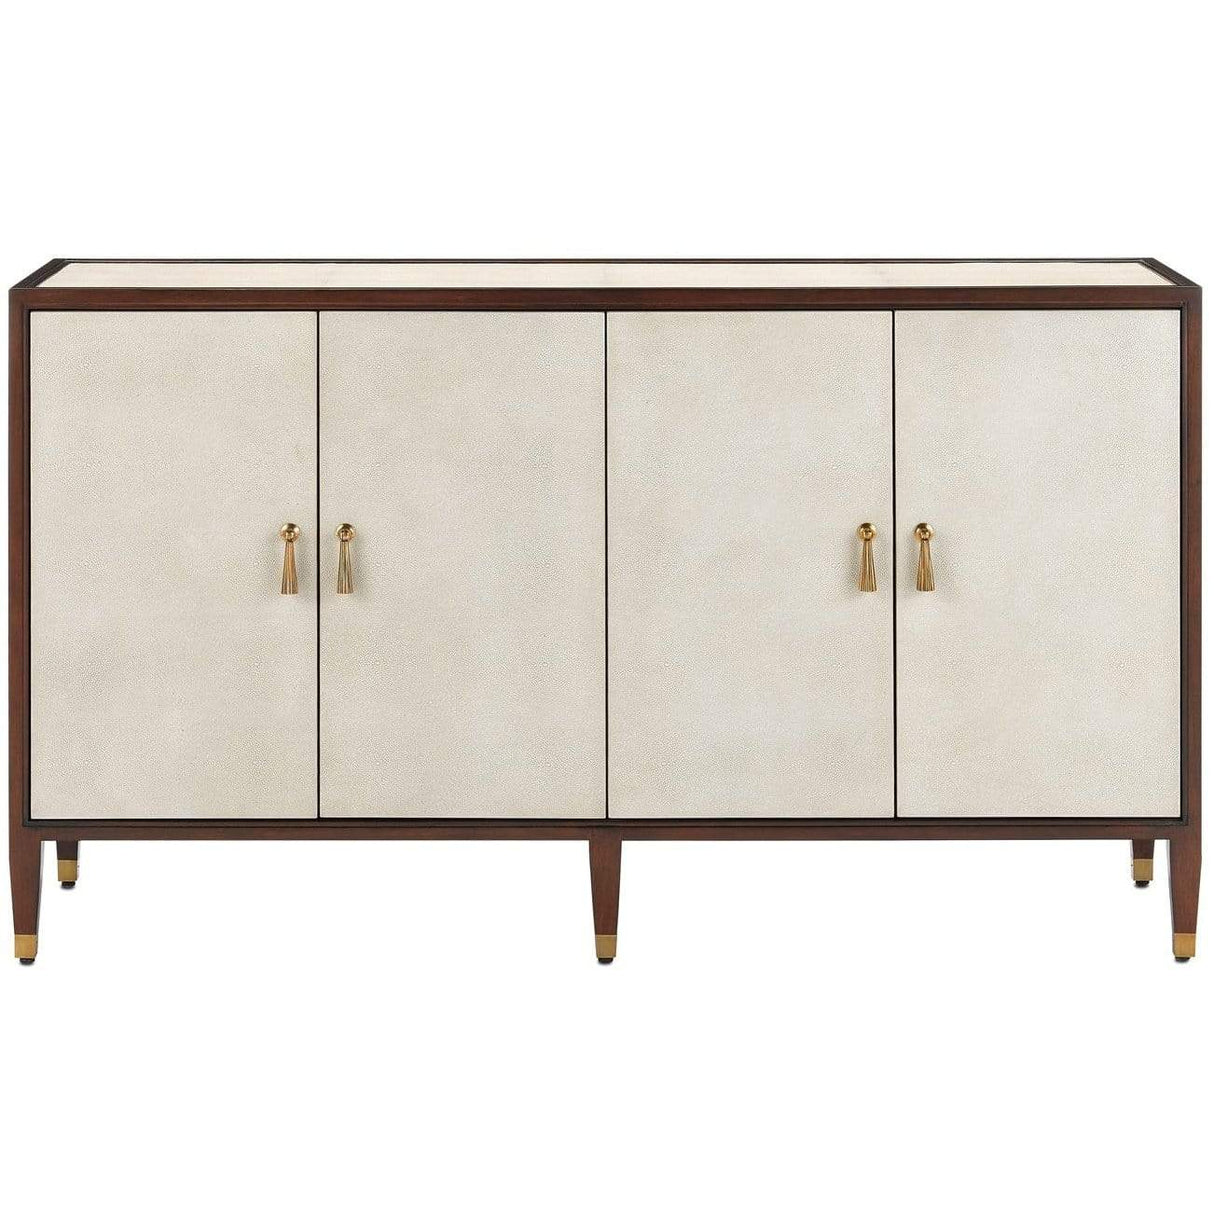 Currey and Company Evie Shagreen Credenza Furniture currey-co-3000-0142